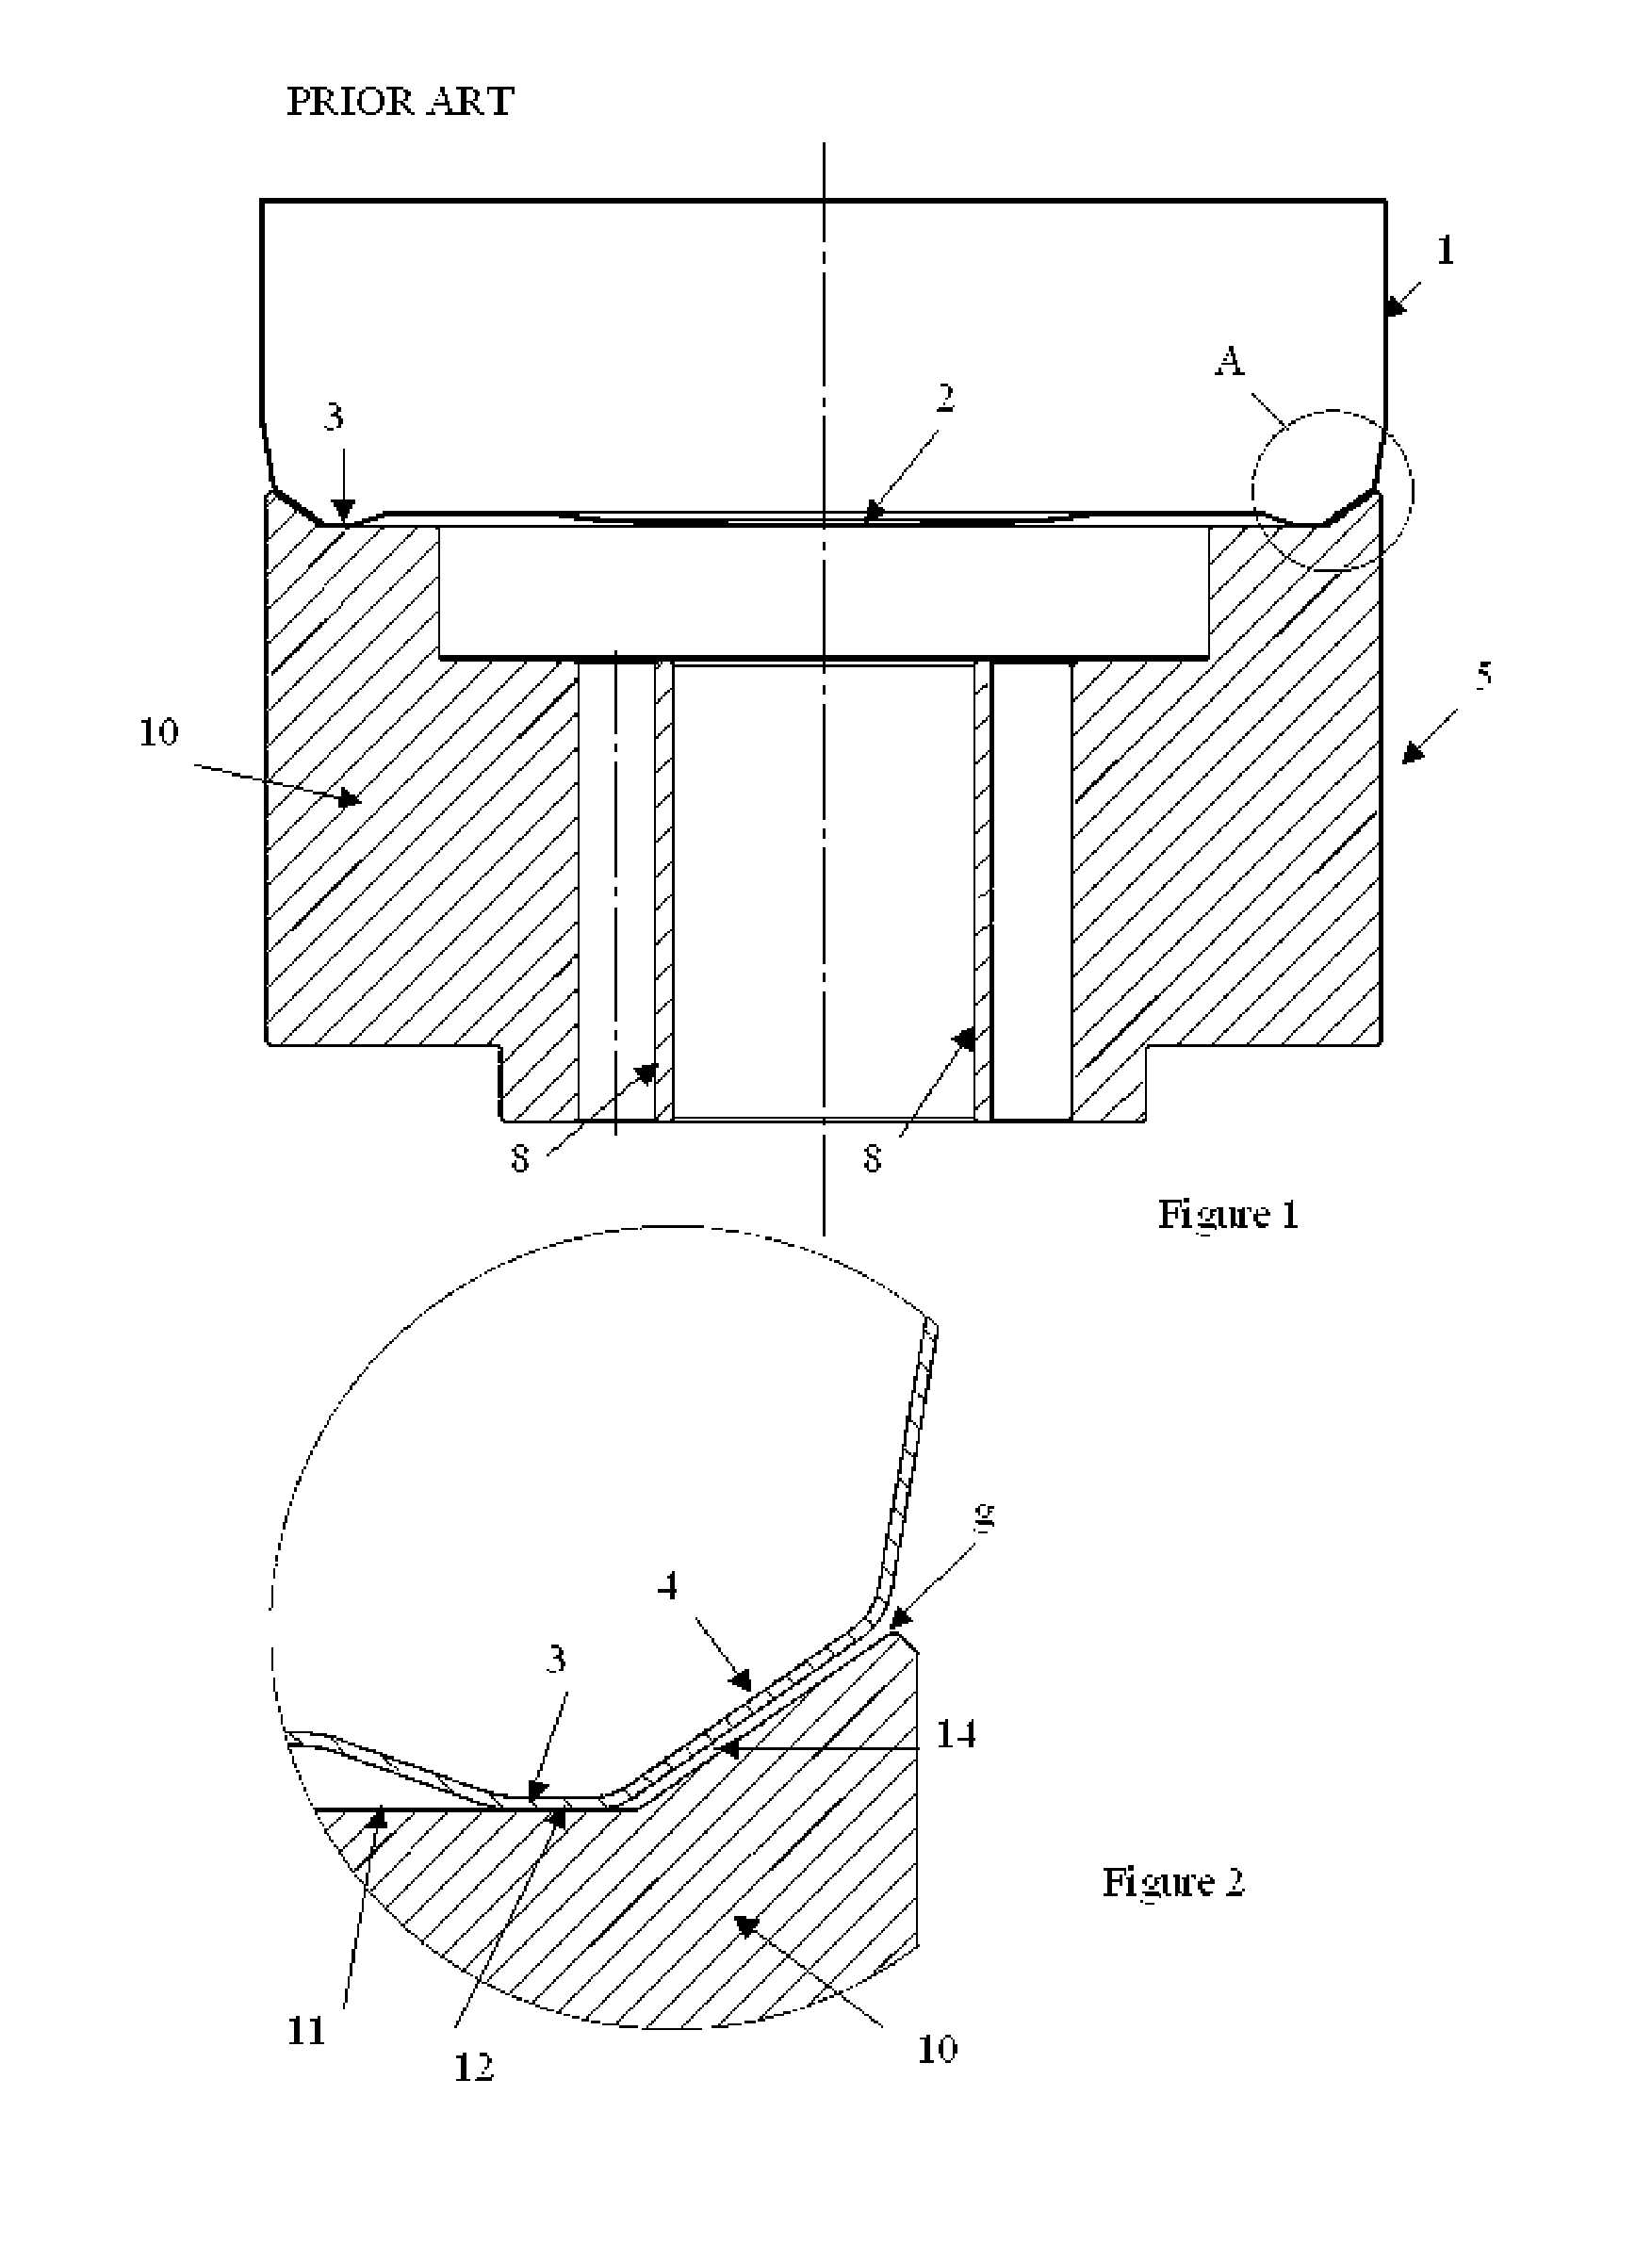 Apparatus for holding a container